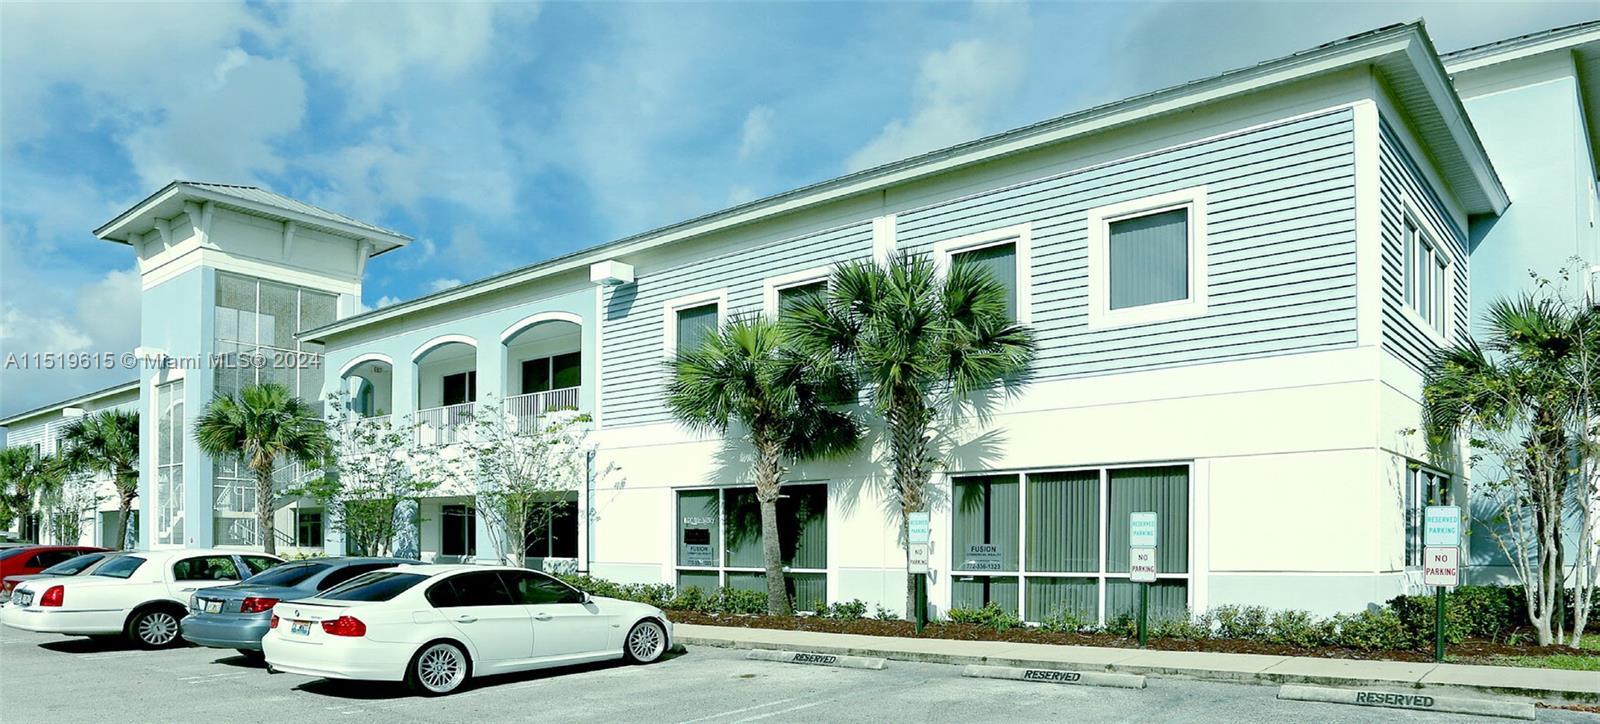 Photo of 540 NW University Blvd #201 & 203 in Port St Lucie, FL